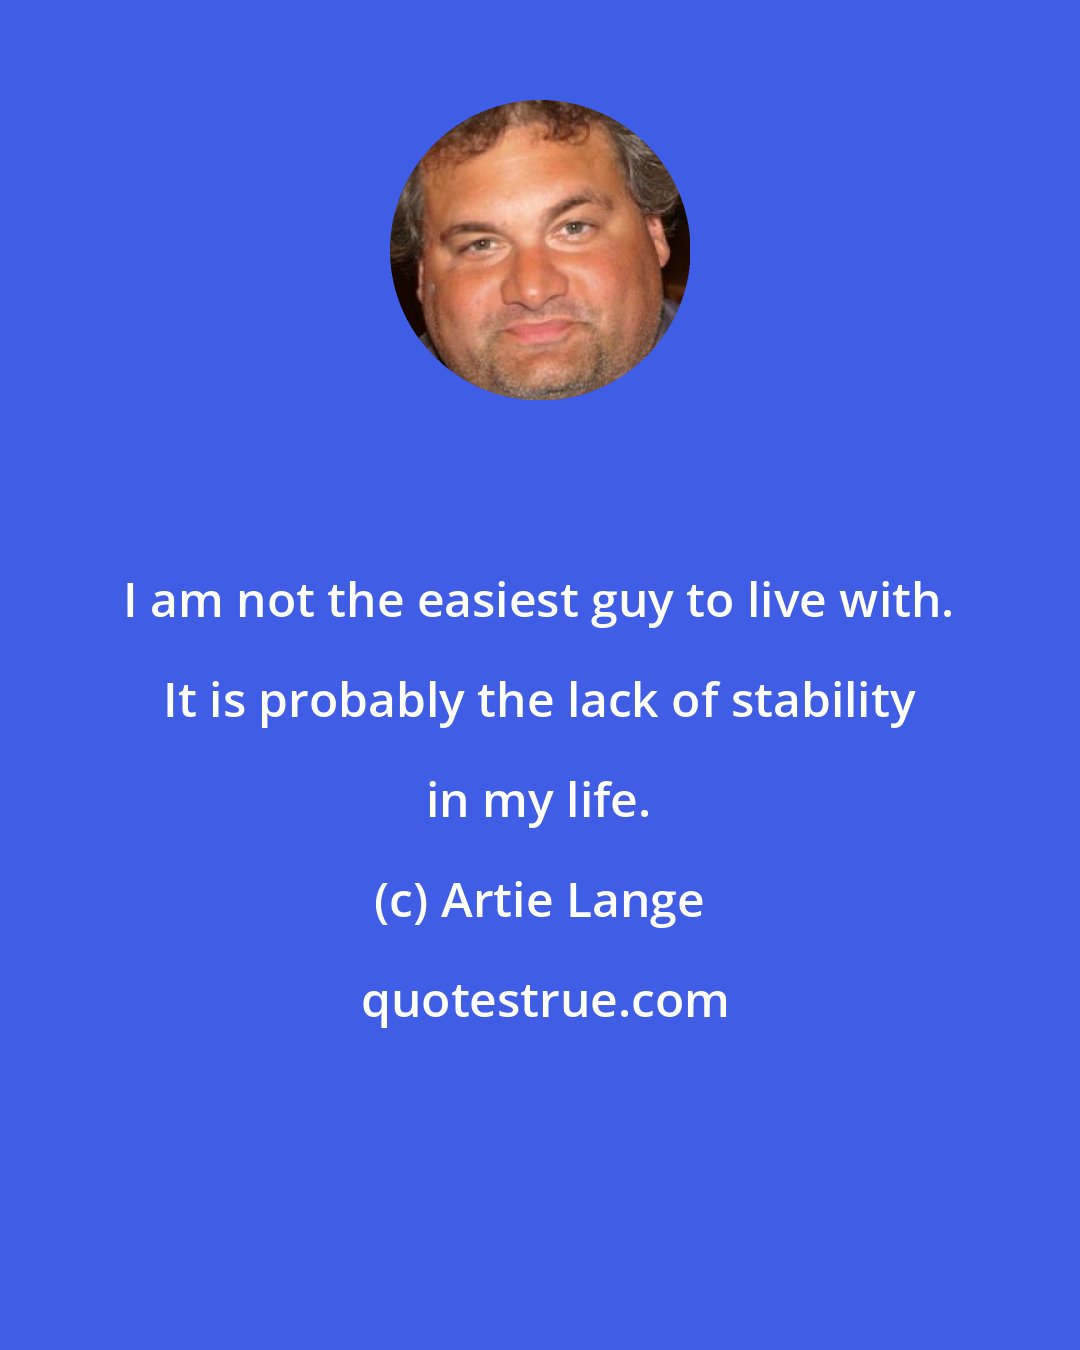 Artie Lange: I am not the easiest guy to live with. It is probably the lack of stability in my life.